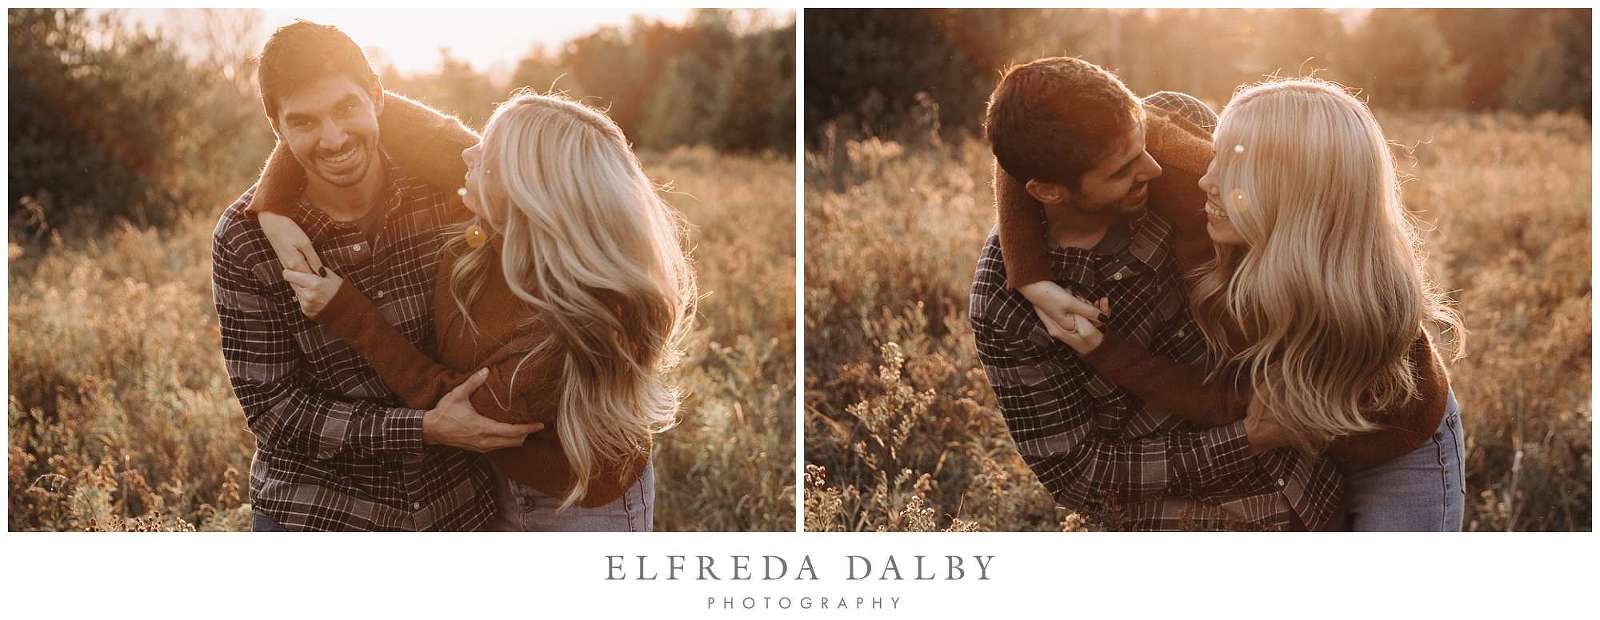 Playful couple in a field during golden hour